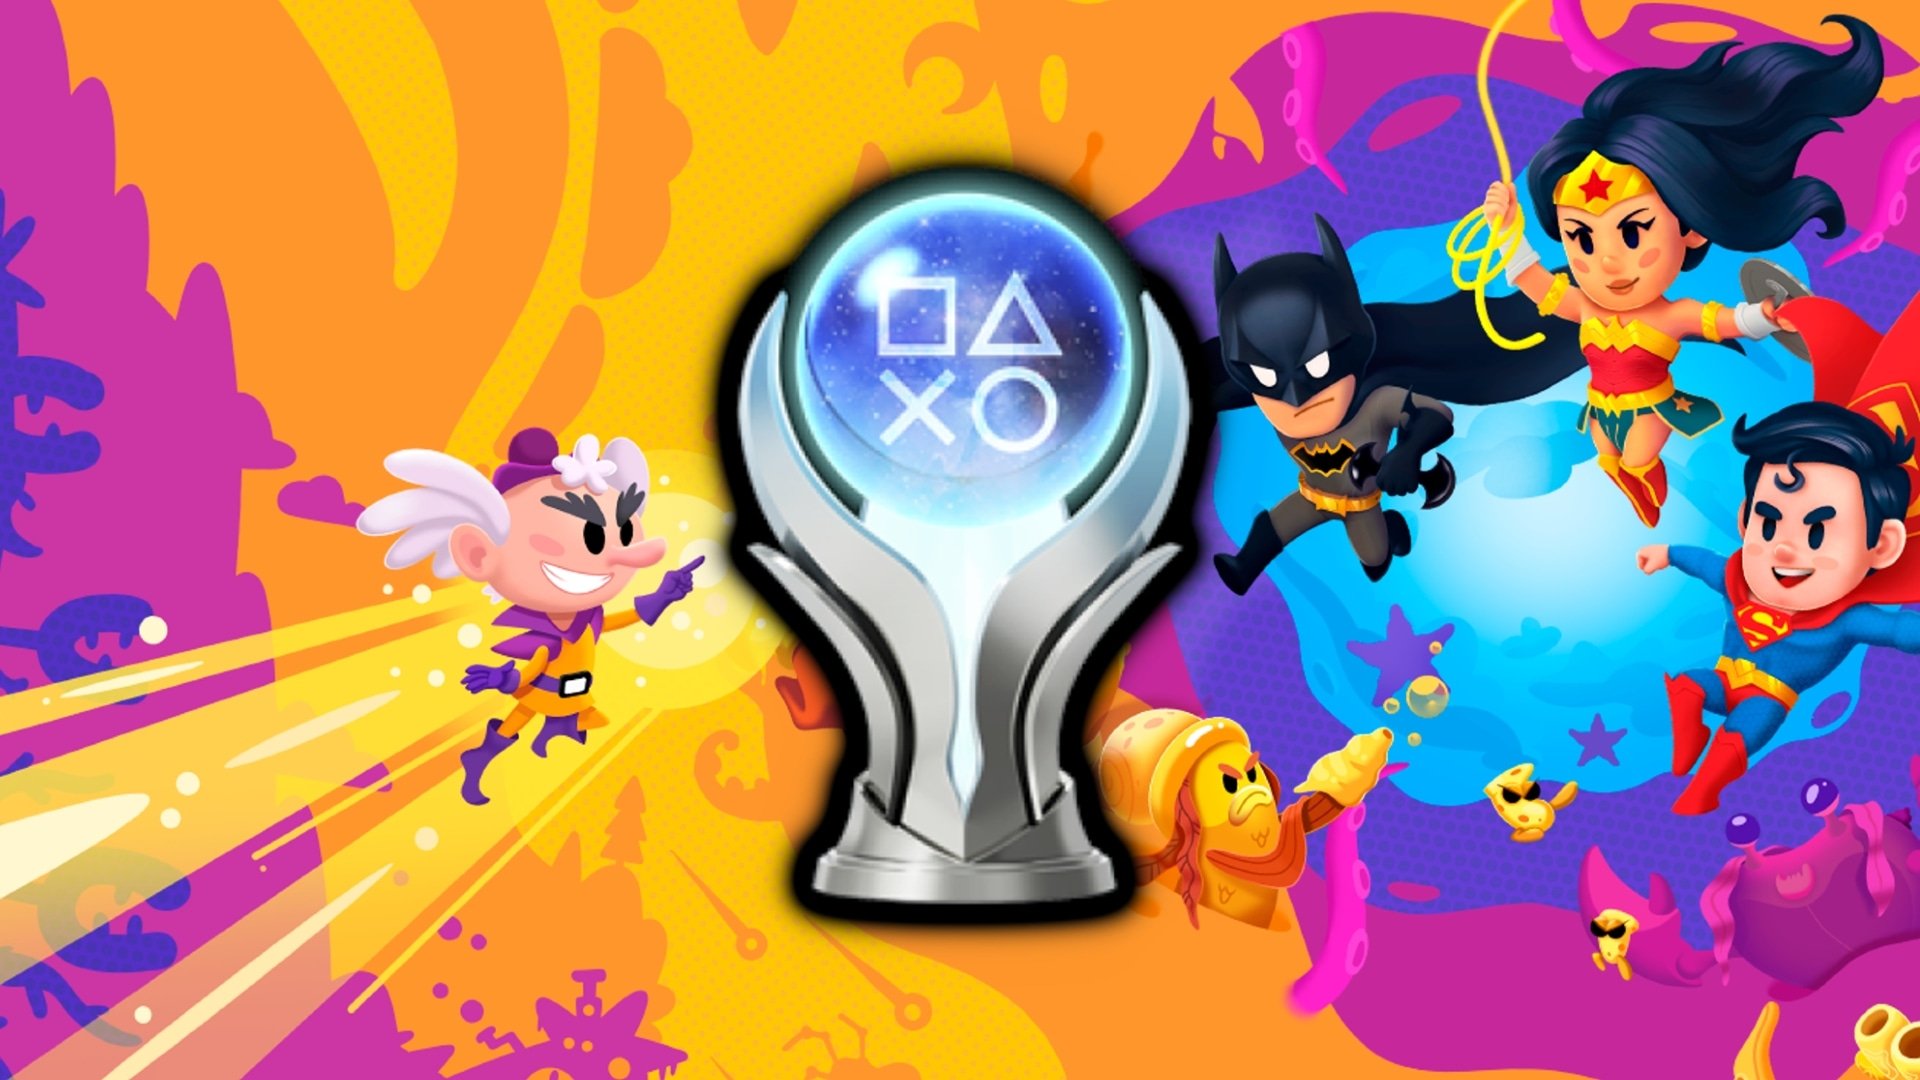 DC's Justice League Cosmic Chaos trophies look an easy platinum